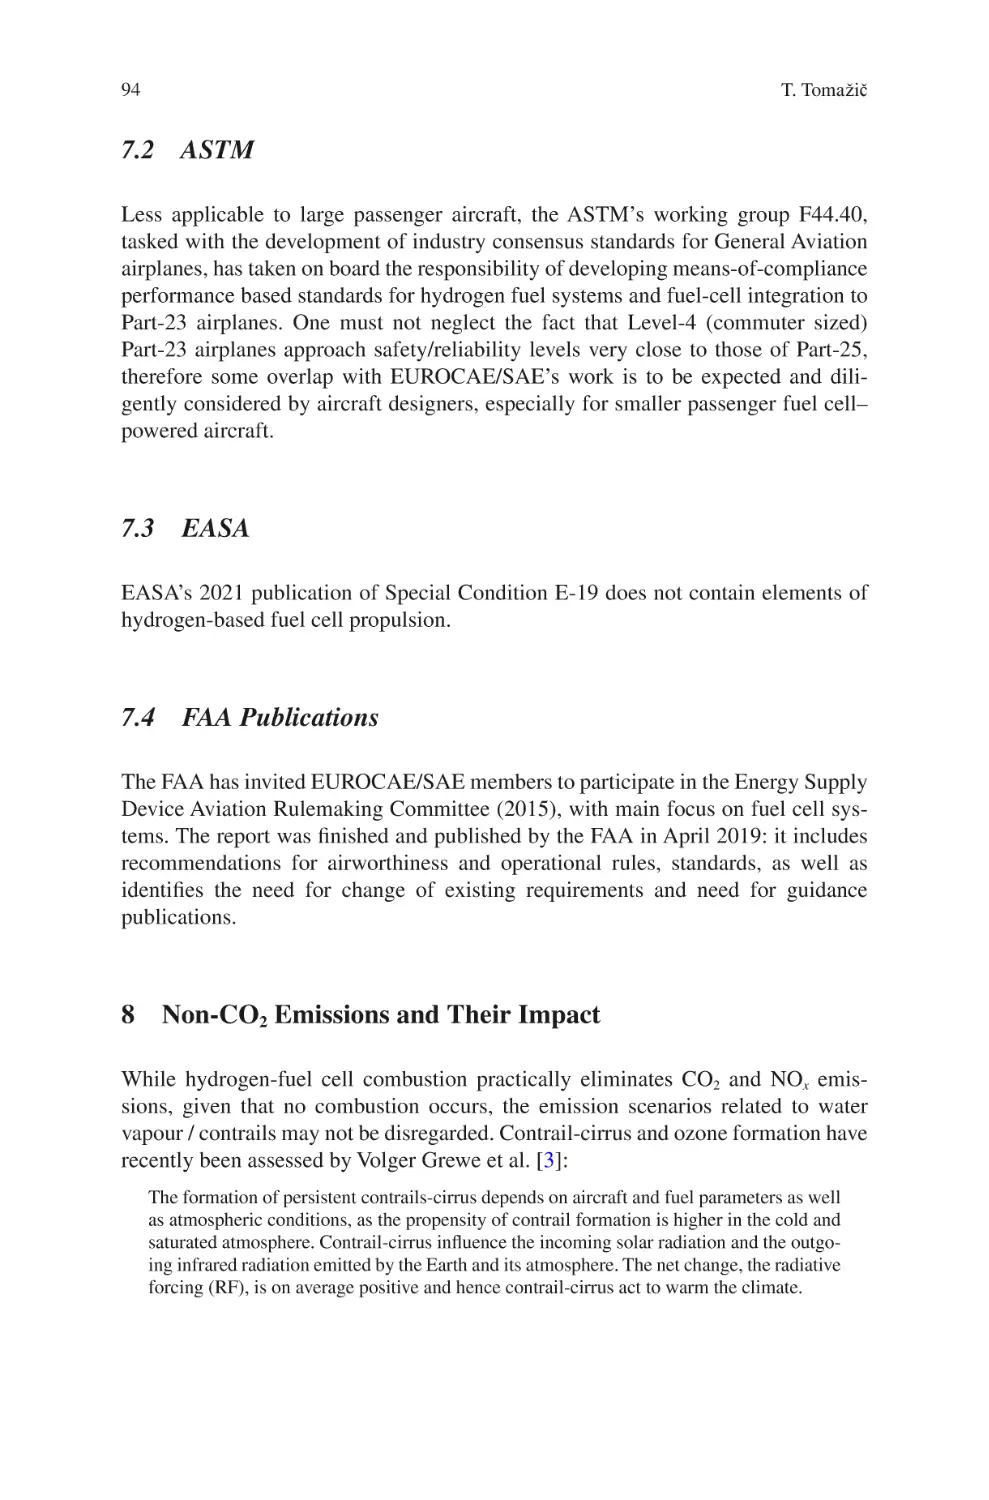 7.2 ASTM
7.3 EASA
7.4 FAA Publications
8 Non-CO2 Emissions and Their Impact